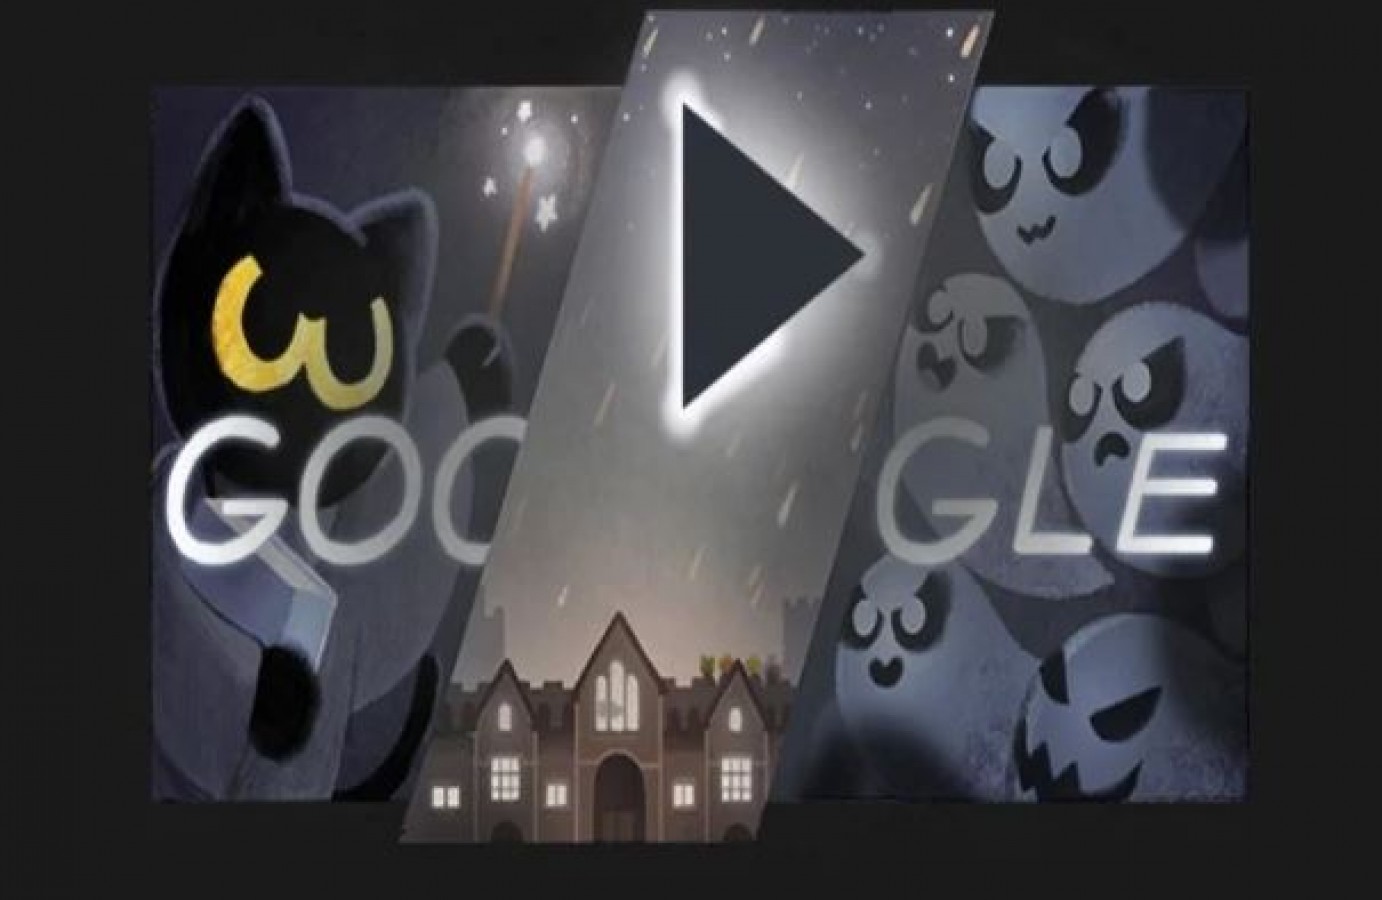 Google made special doodle on Halloween game during lockdown